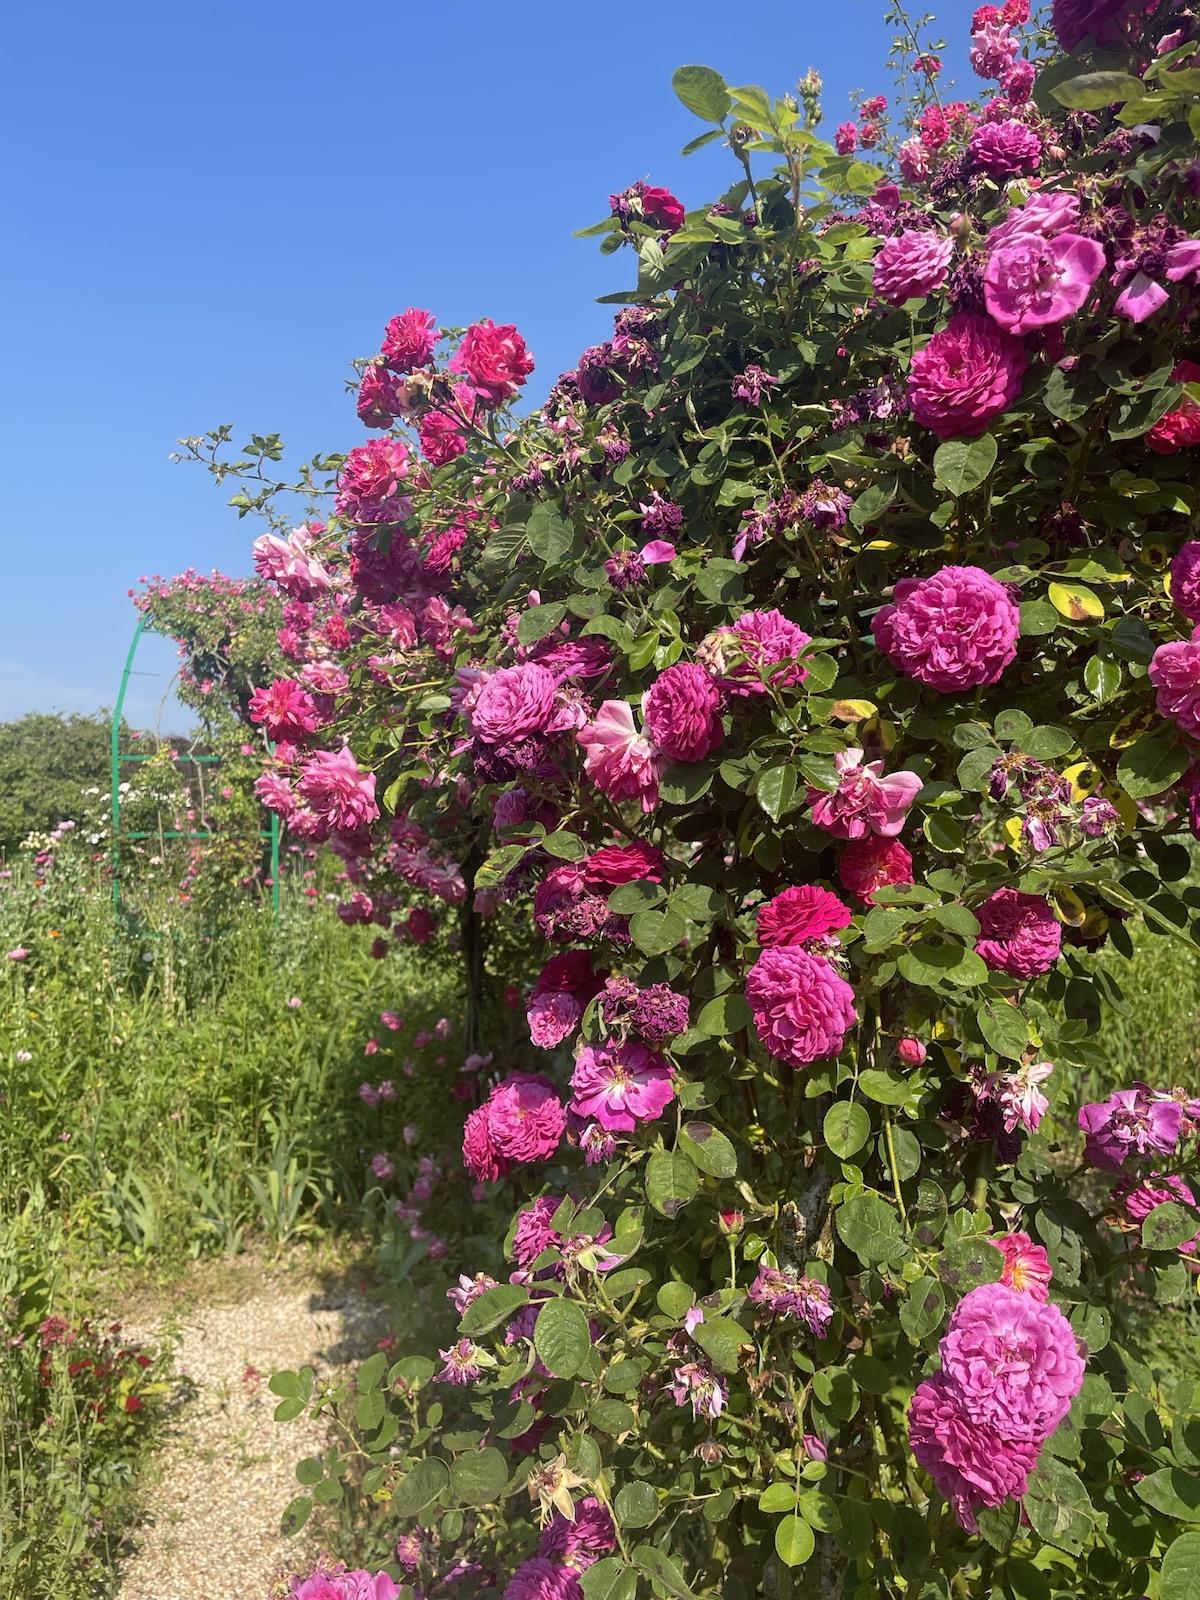 Monet’s Garden in Giverny, Roses on the trellis that was once part of the apple orchard.